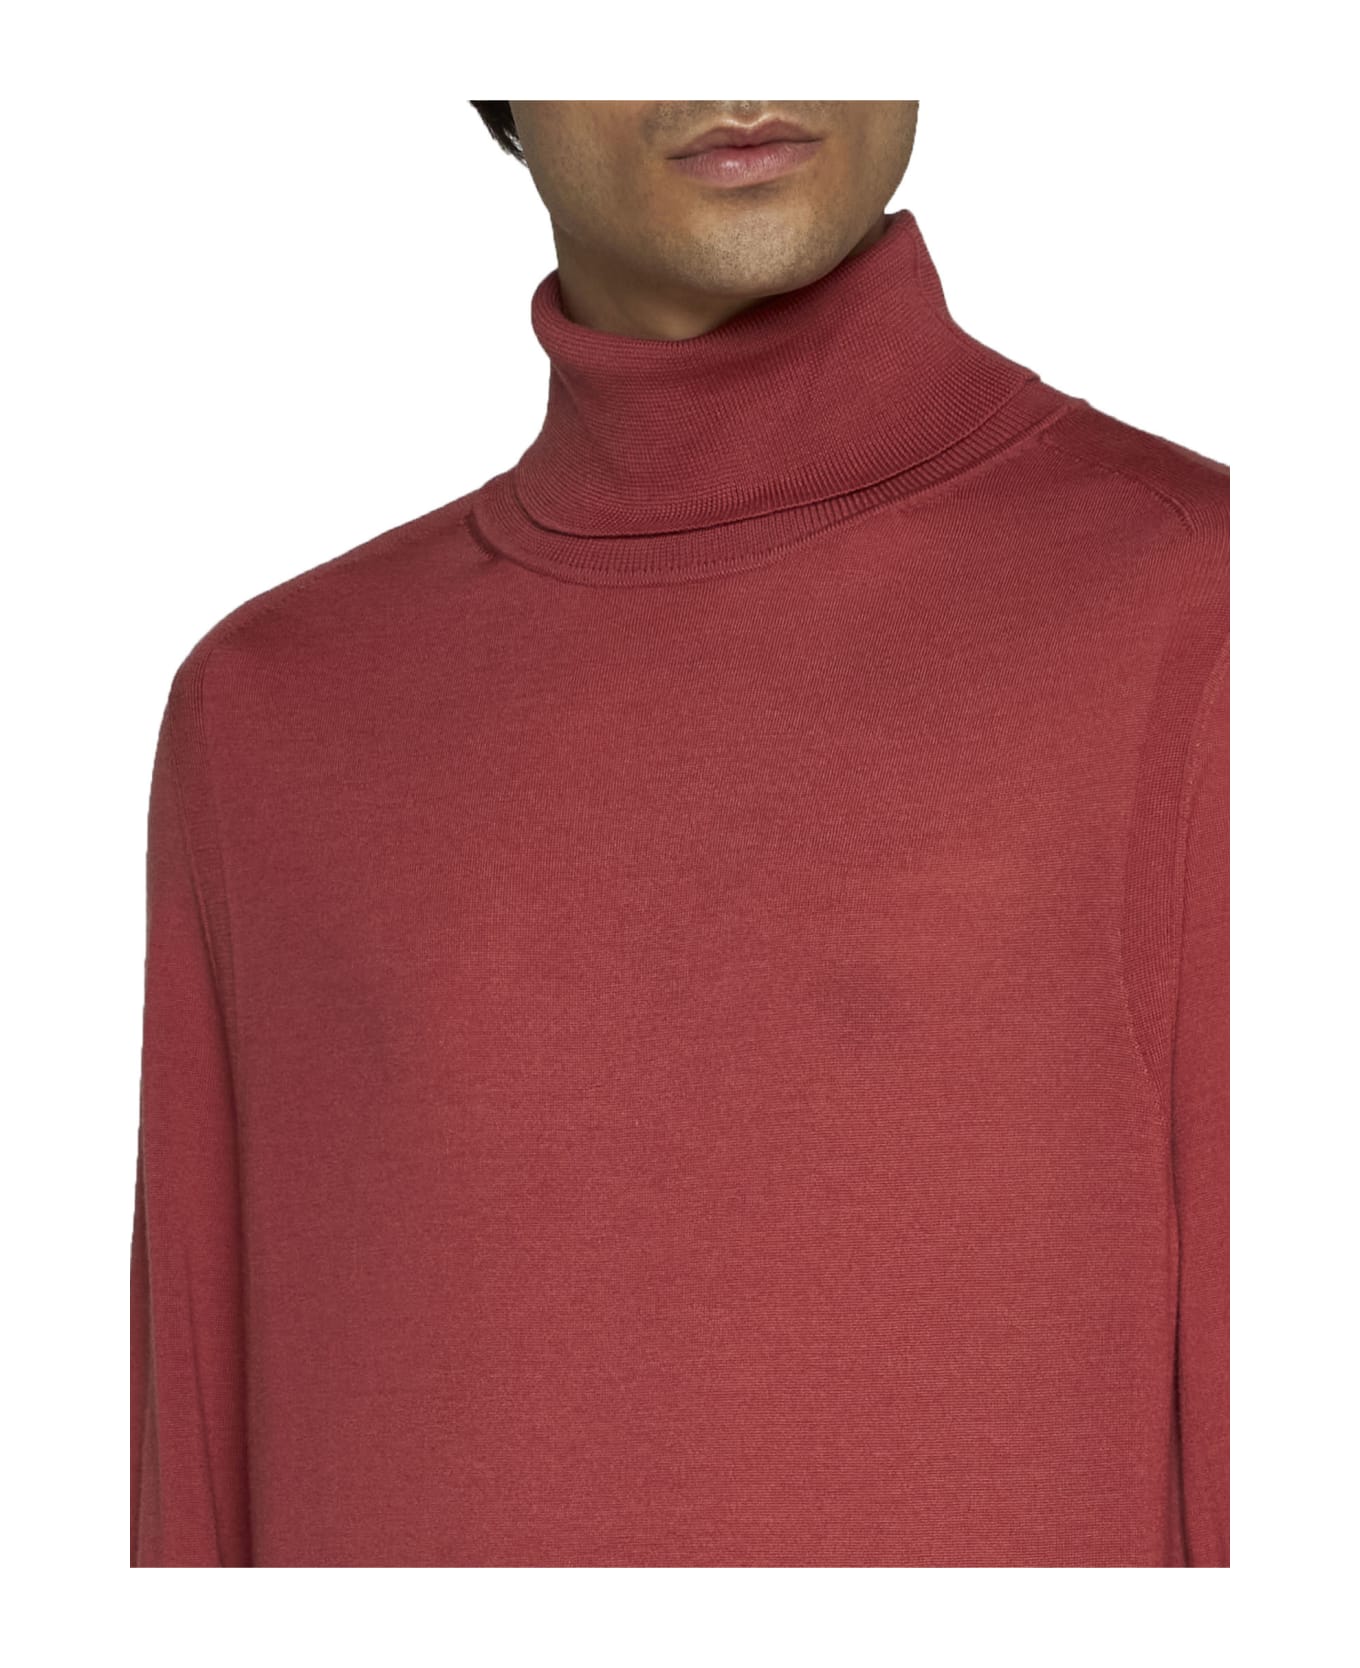 Paul Smith Sweater - Coral